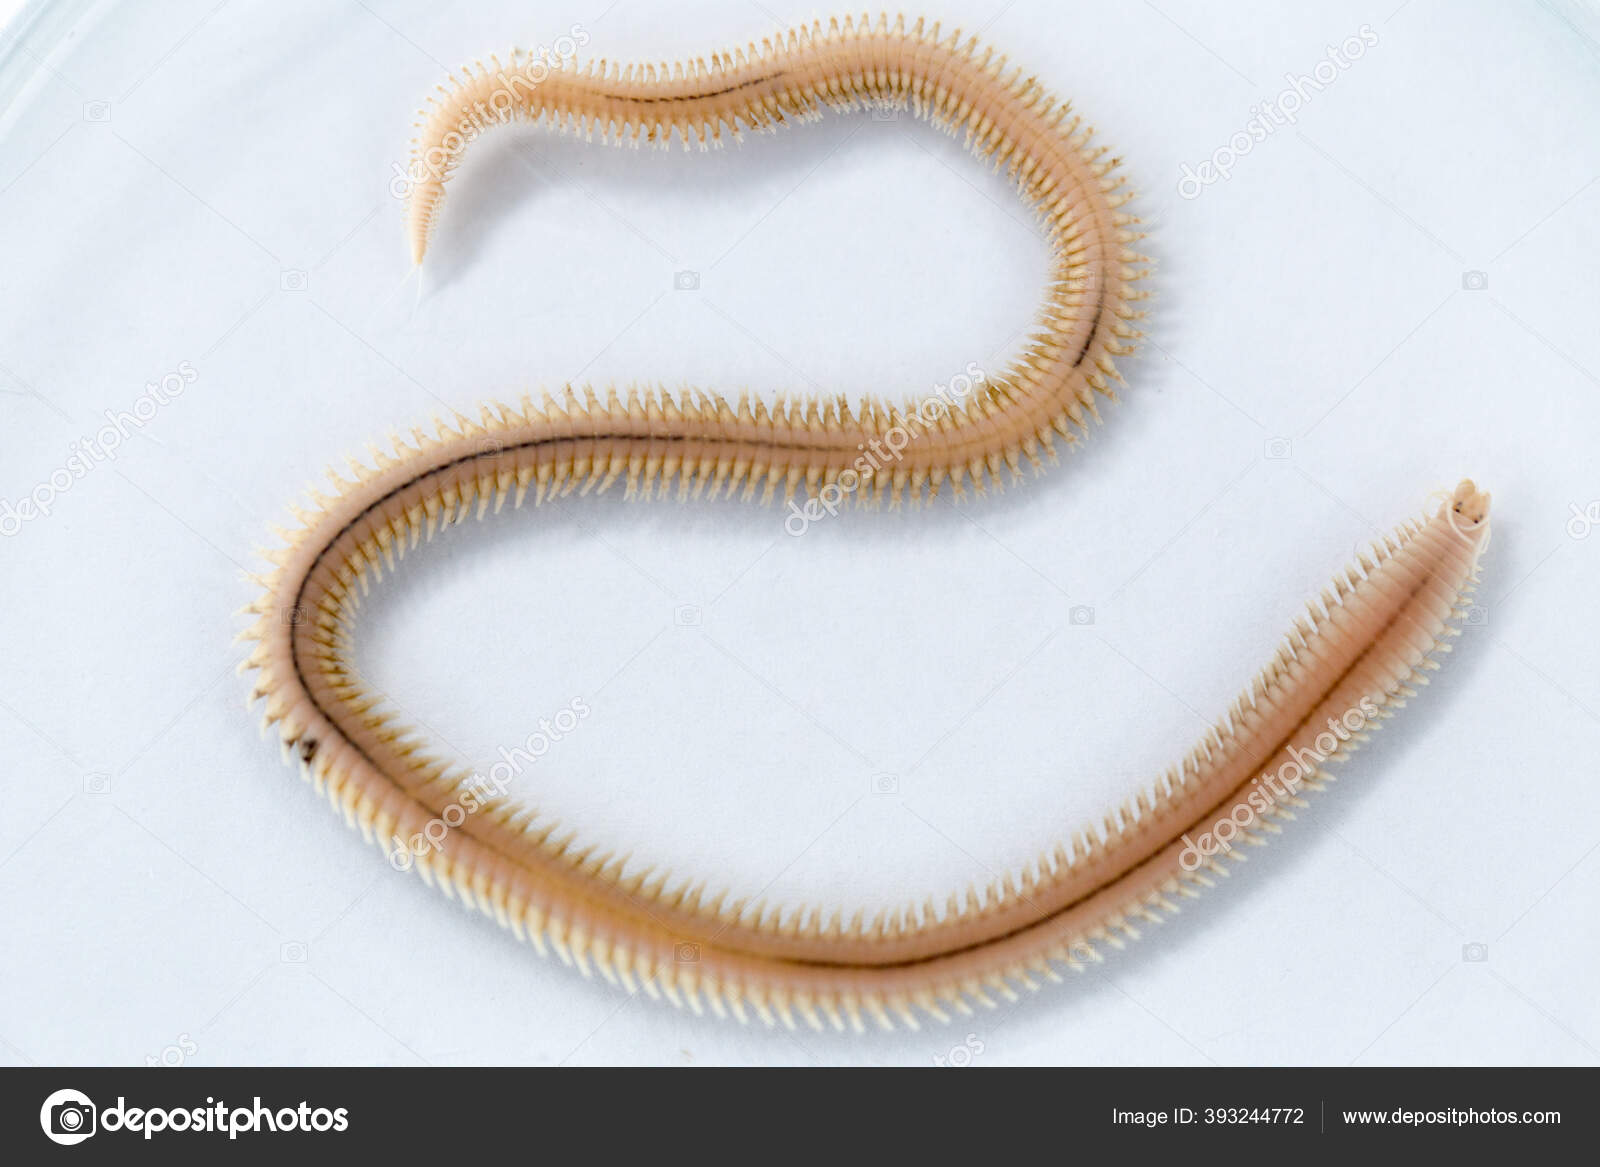 Polychaetes Paraphyletic Class Annelid Worms Generally Marine Stereo  Microscope View — Stock Photo © p.thongdumhyu #393244772